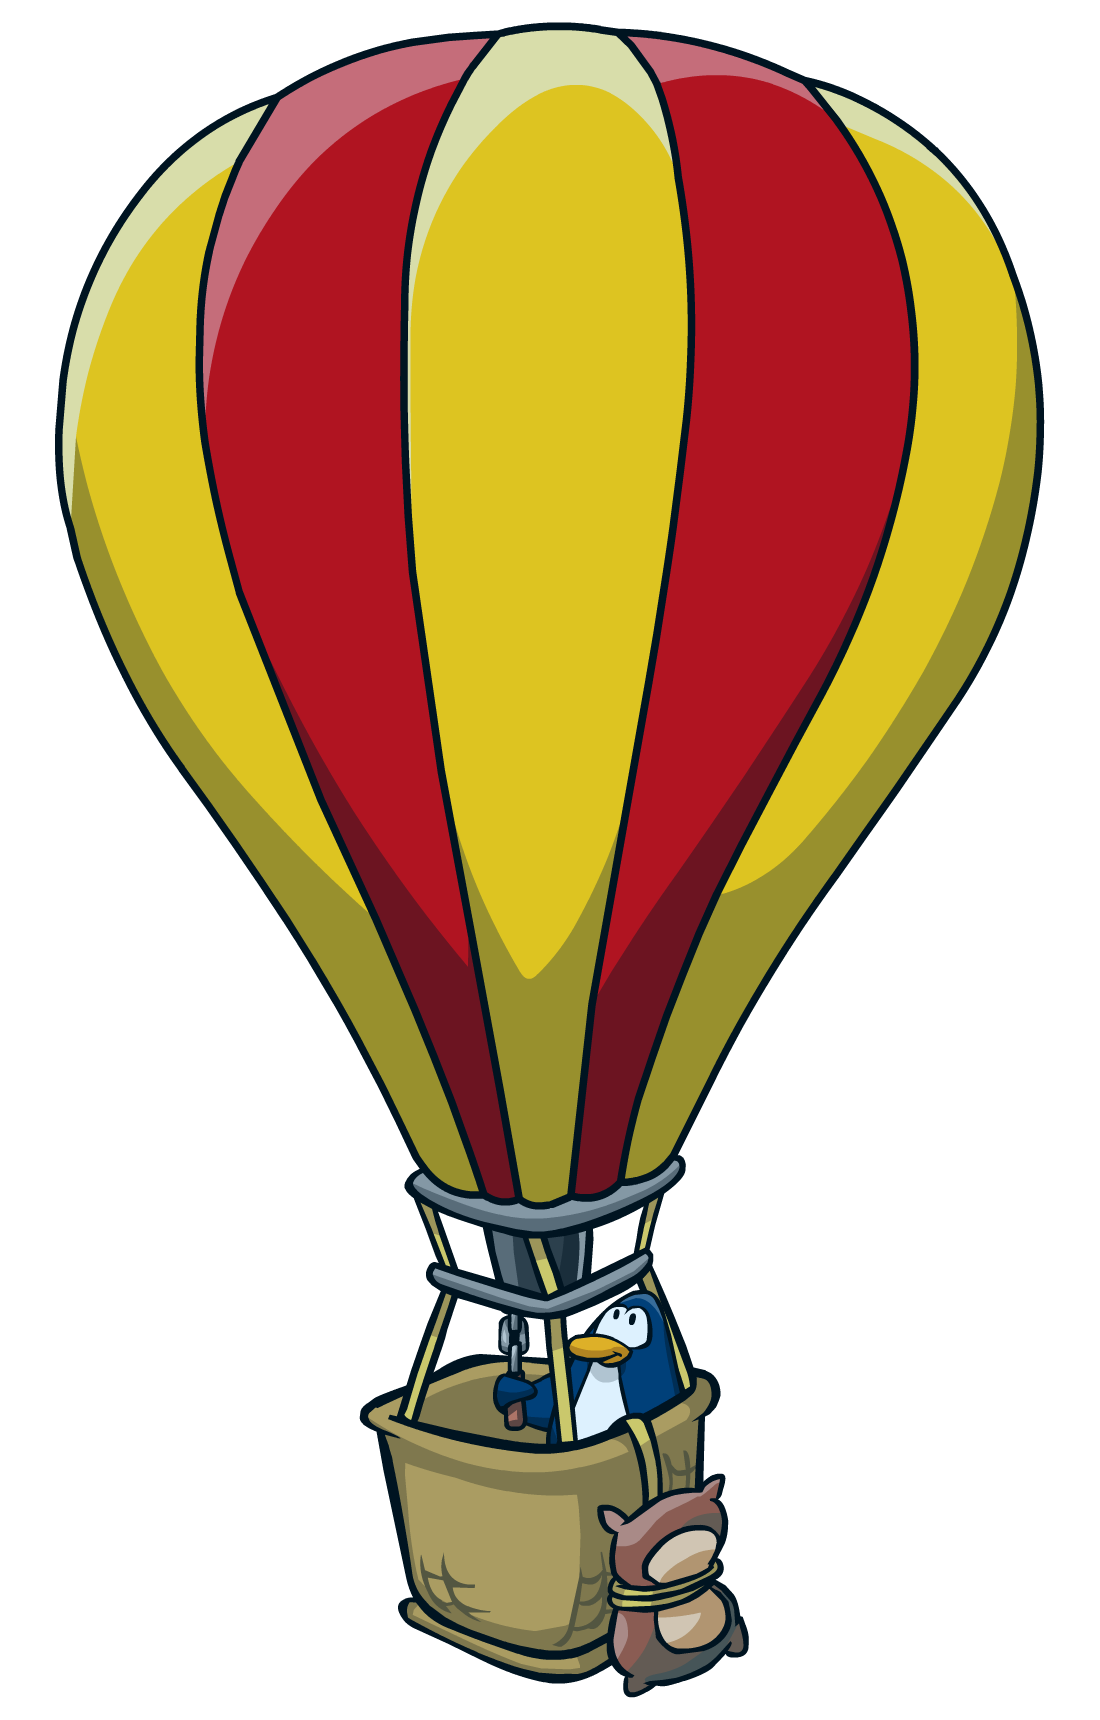 Image - Super Hero Bounce Hot Air Balloon.png | Club Penguin Wiki ...